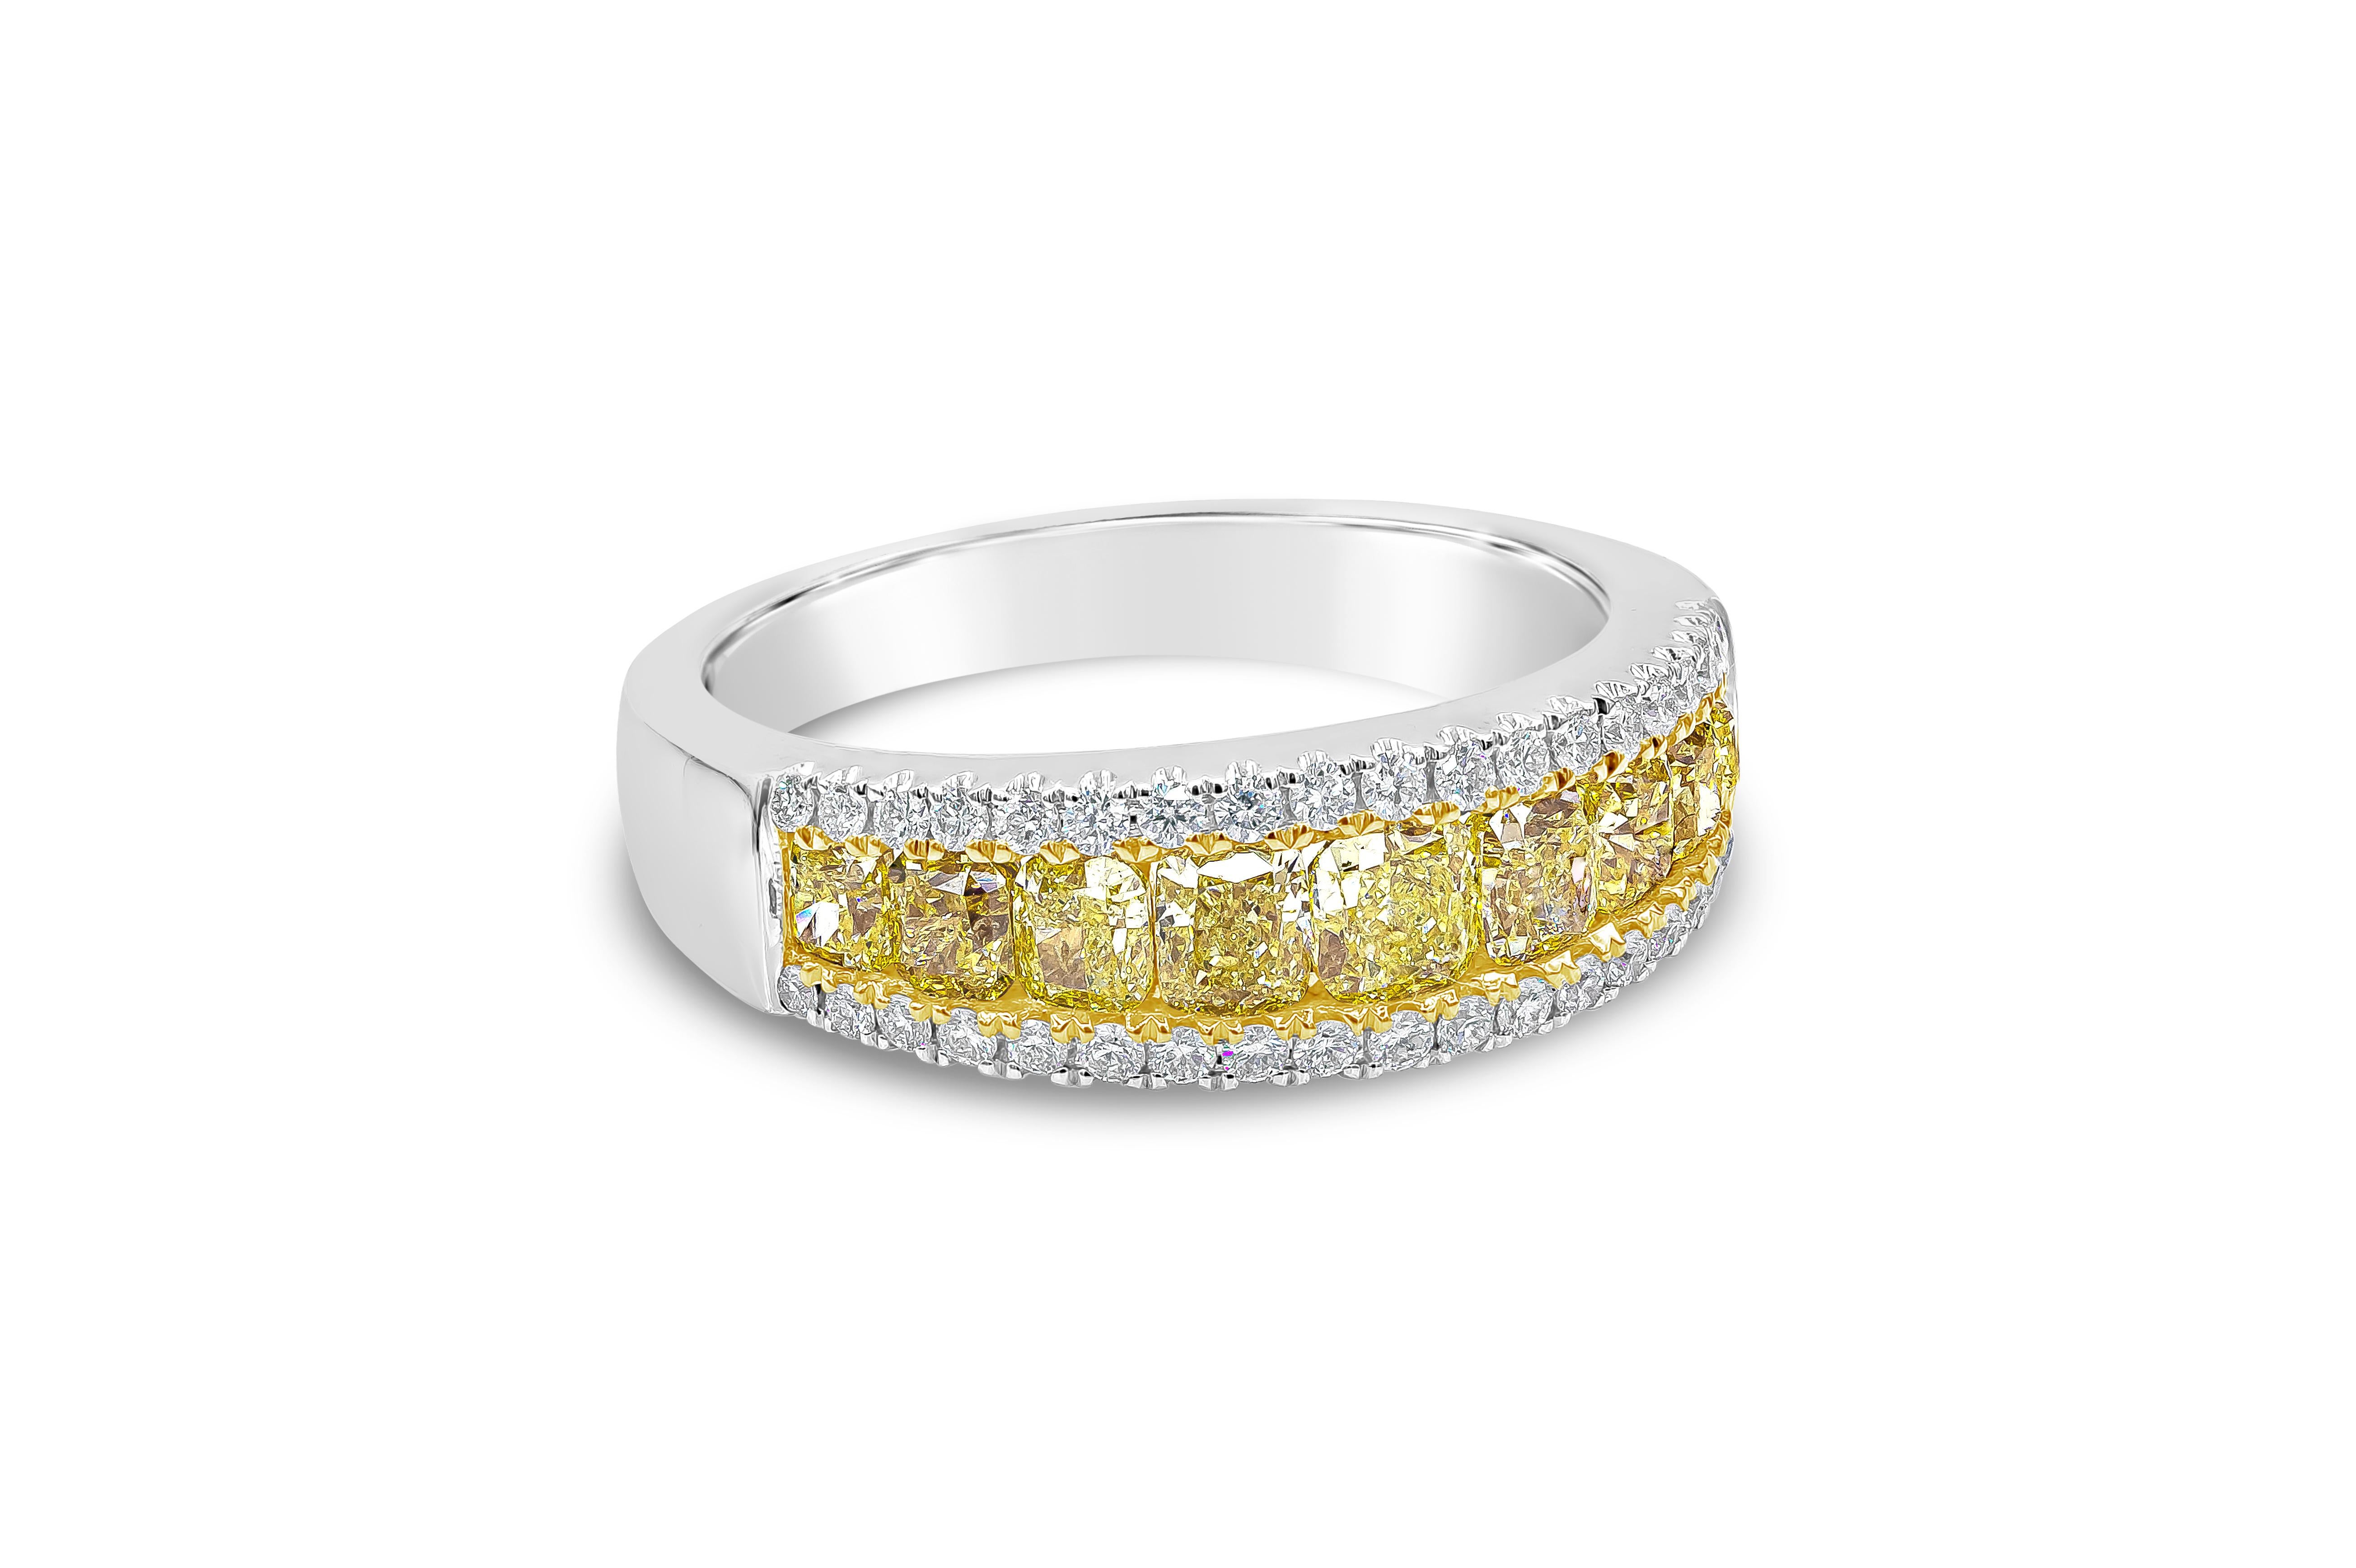 A dazzling wedding band showcasing a row of graduating color rich fancy yellow cushion cut diamonds weighing 1.60 carats total, flushed set in 18K yellow gold. Accented on each side is a row of brilliant round diamonds weighing 0.29 carats total.